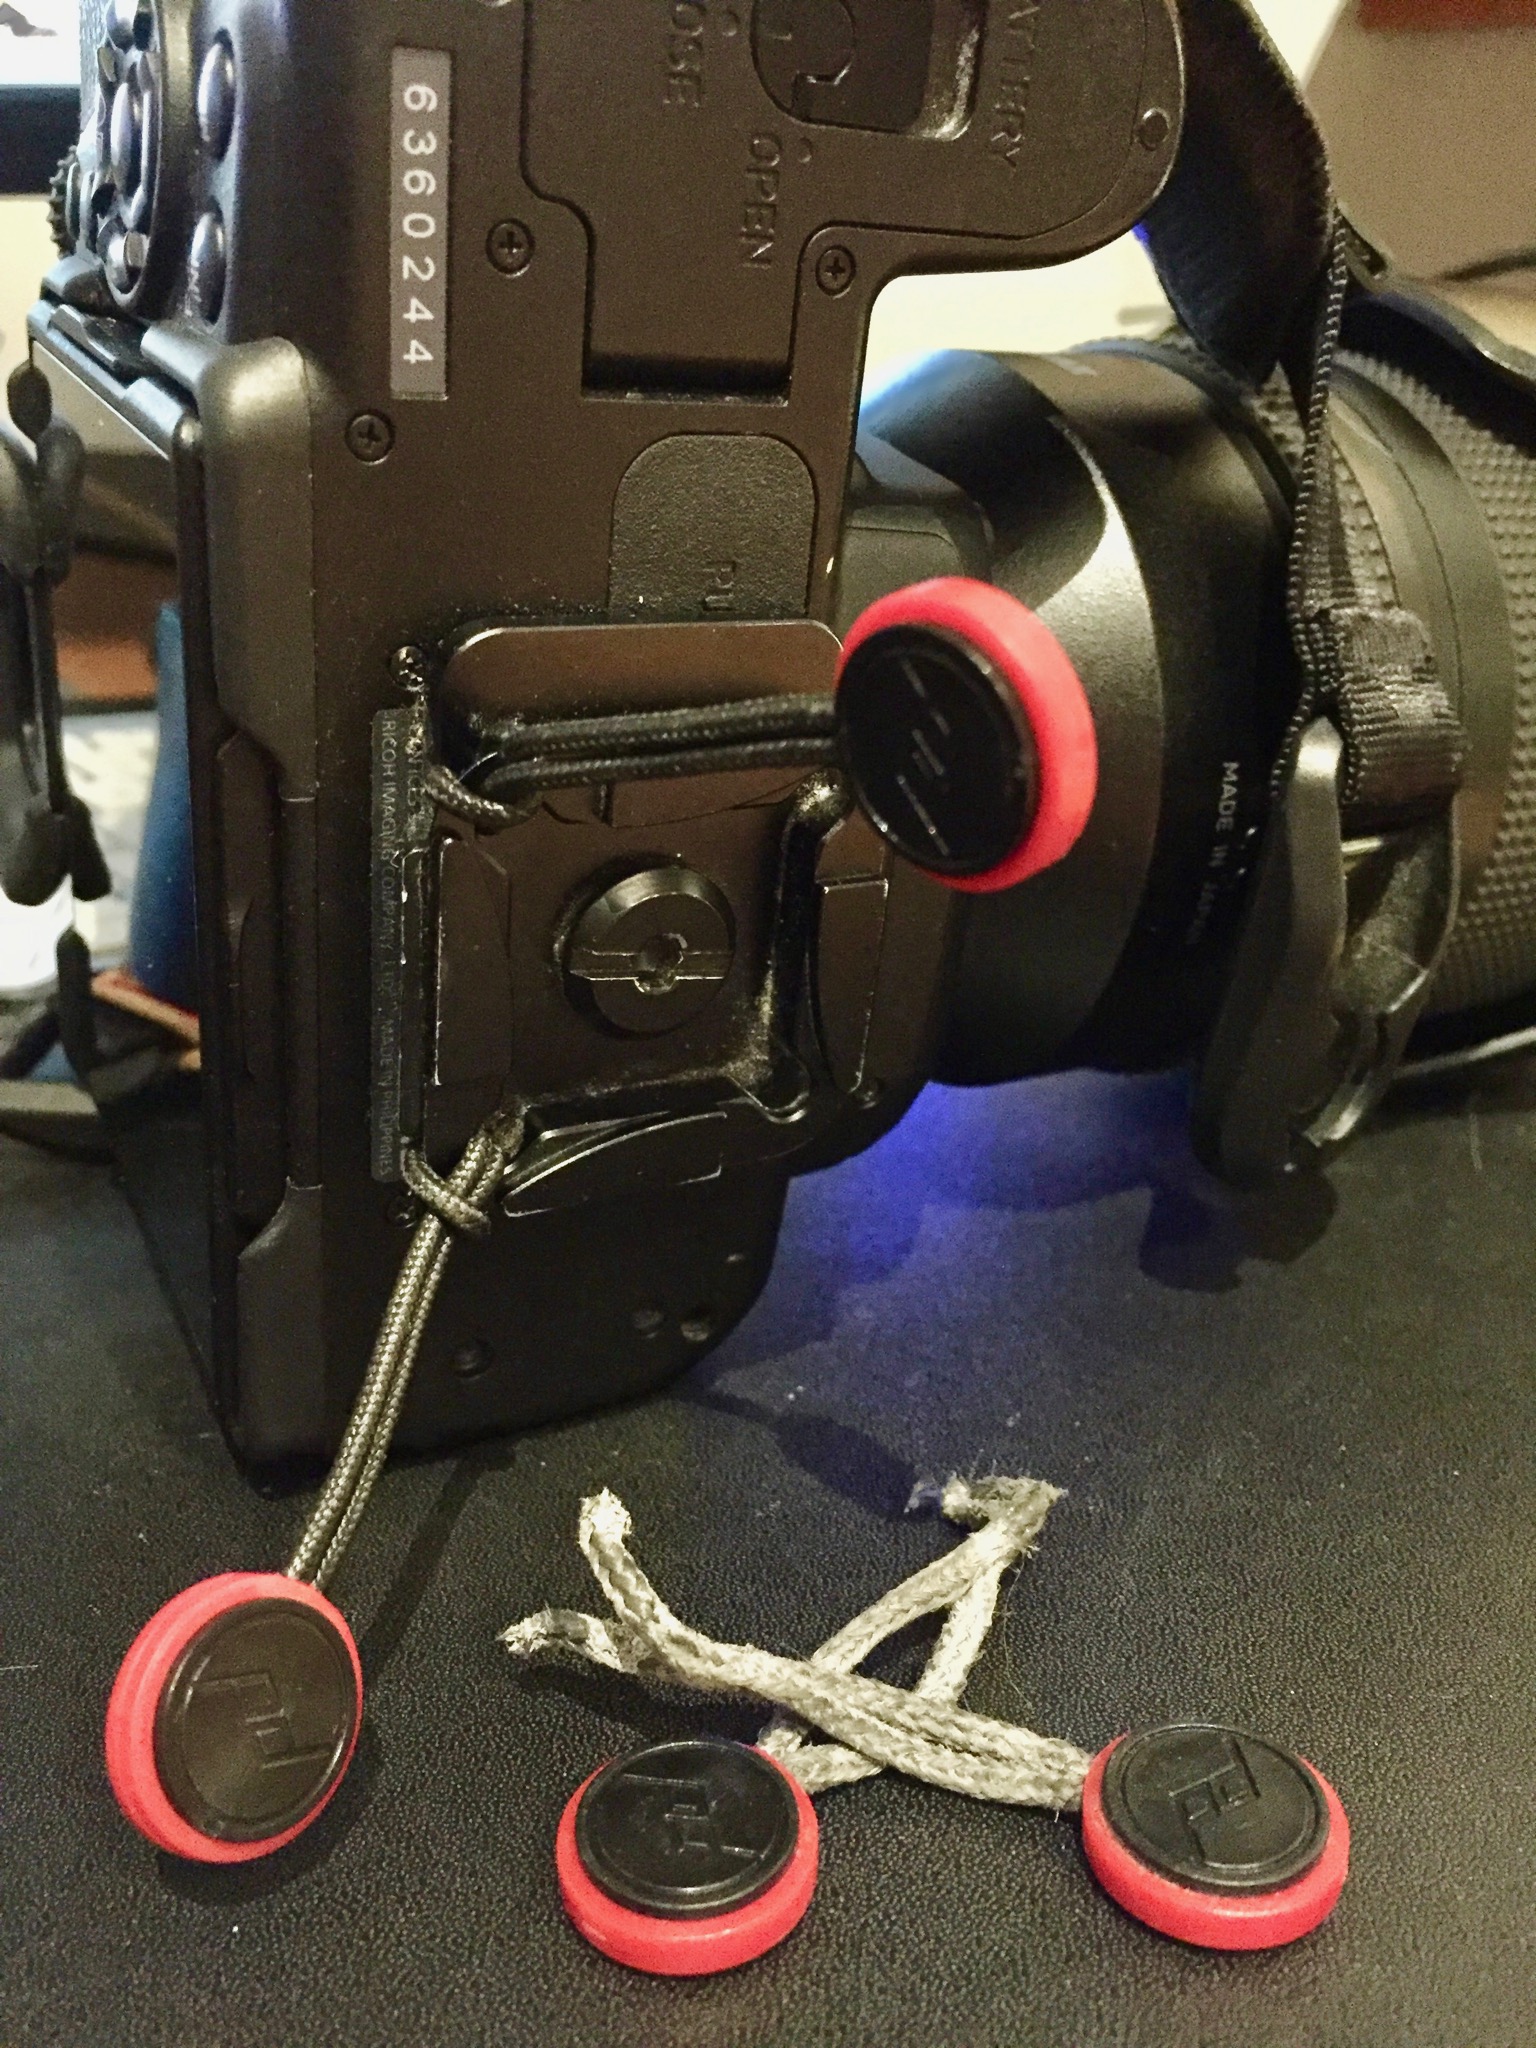 New anchors attached to my camera.